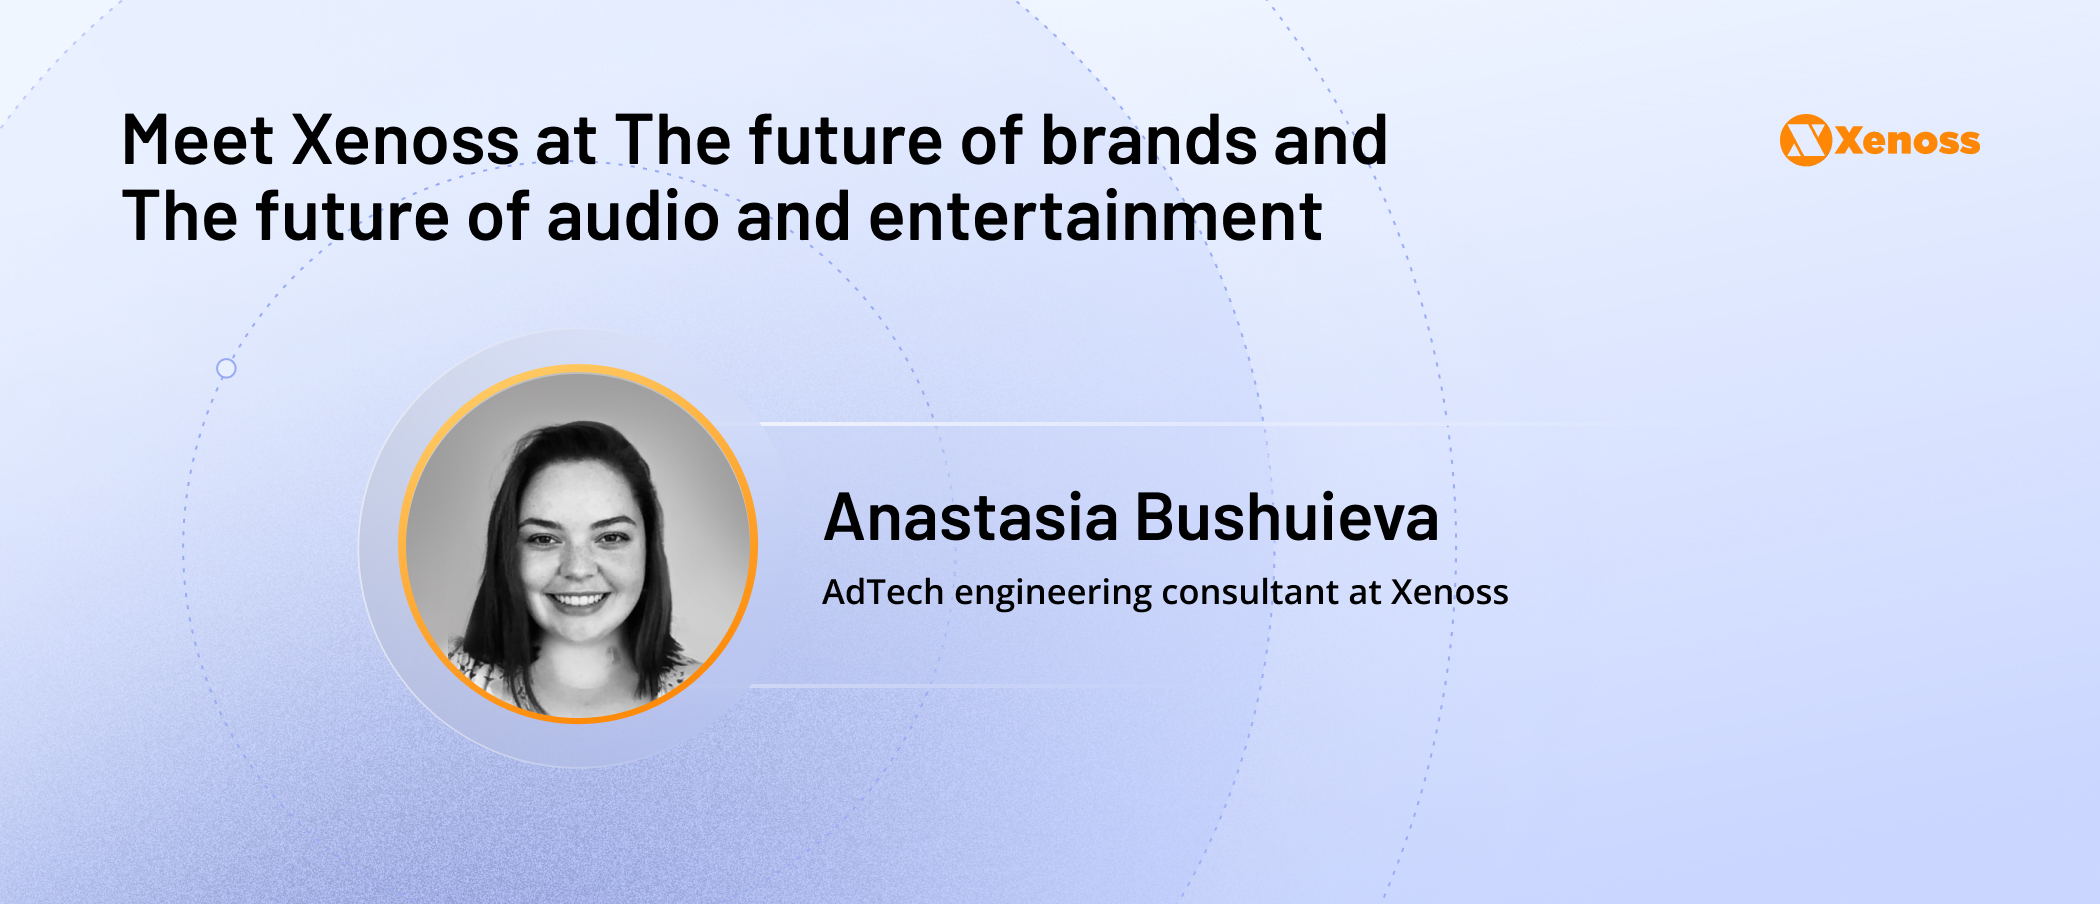 Xenoss at The future of brands and The future of Audio and Entertainment